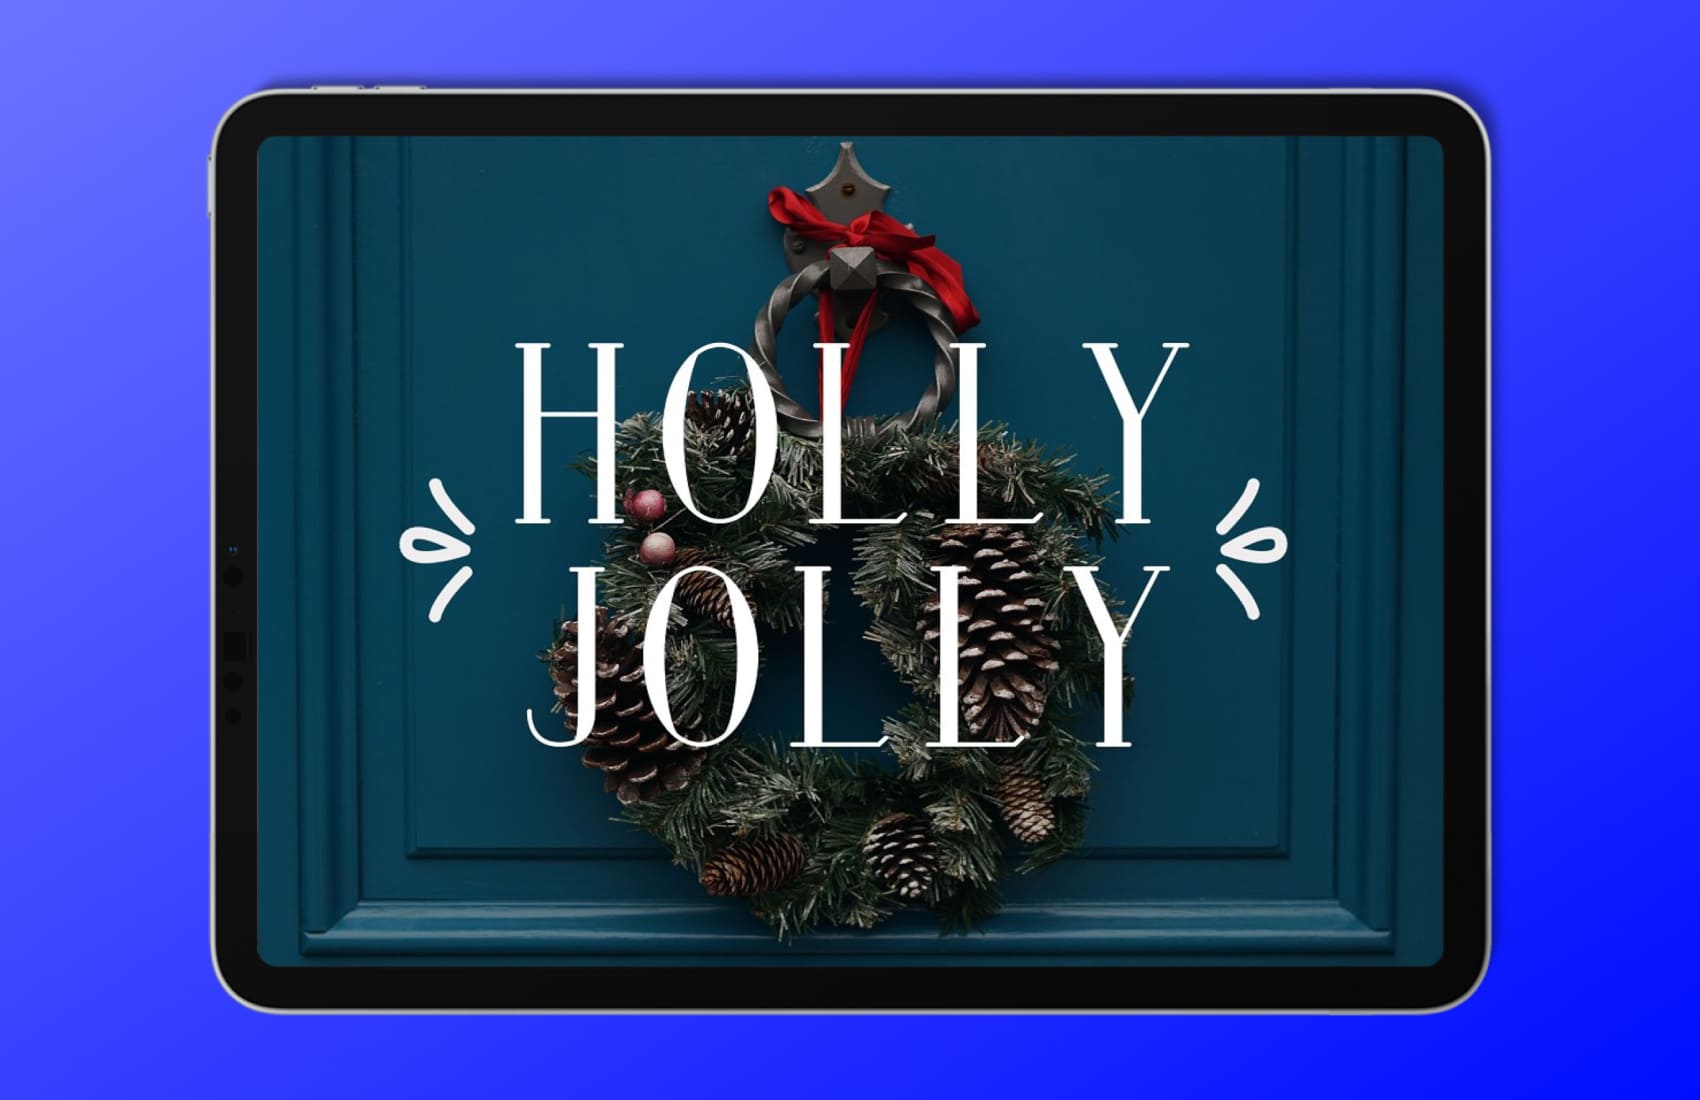 Wintery - A Serif Font Family "Holly Jolly Preview" On The Tablet.